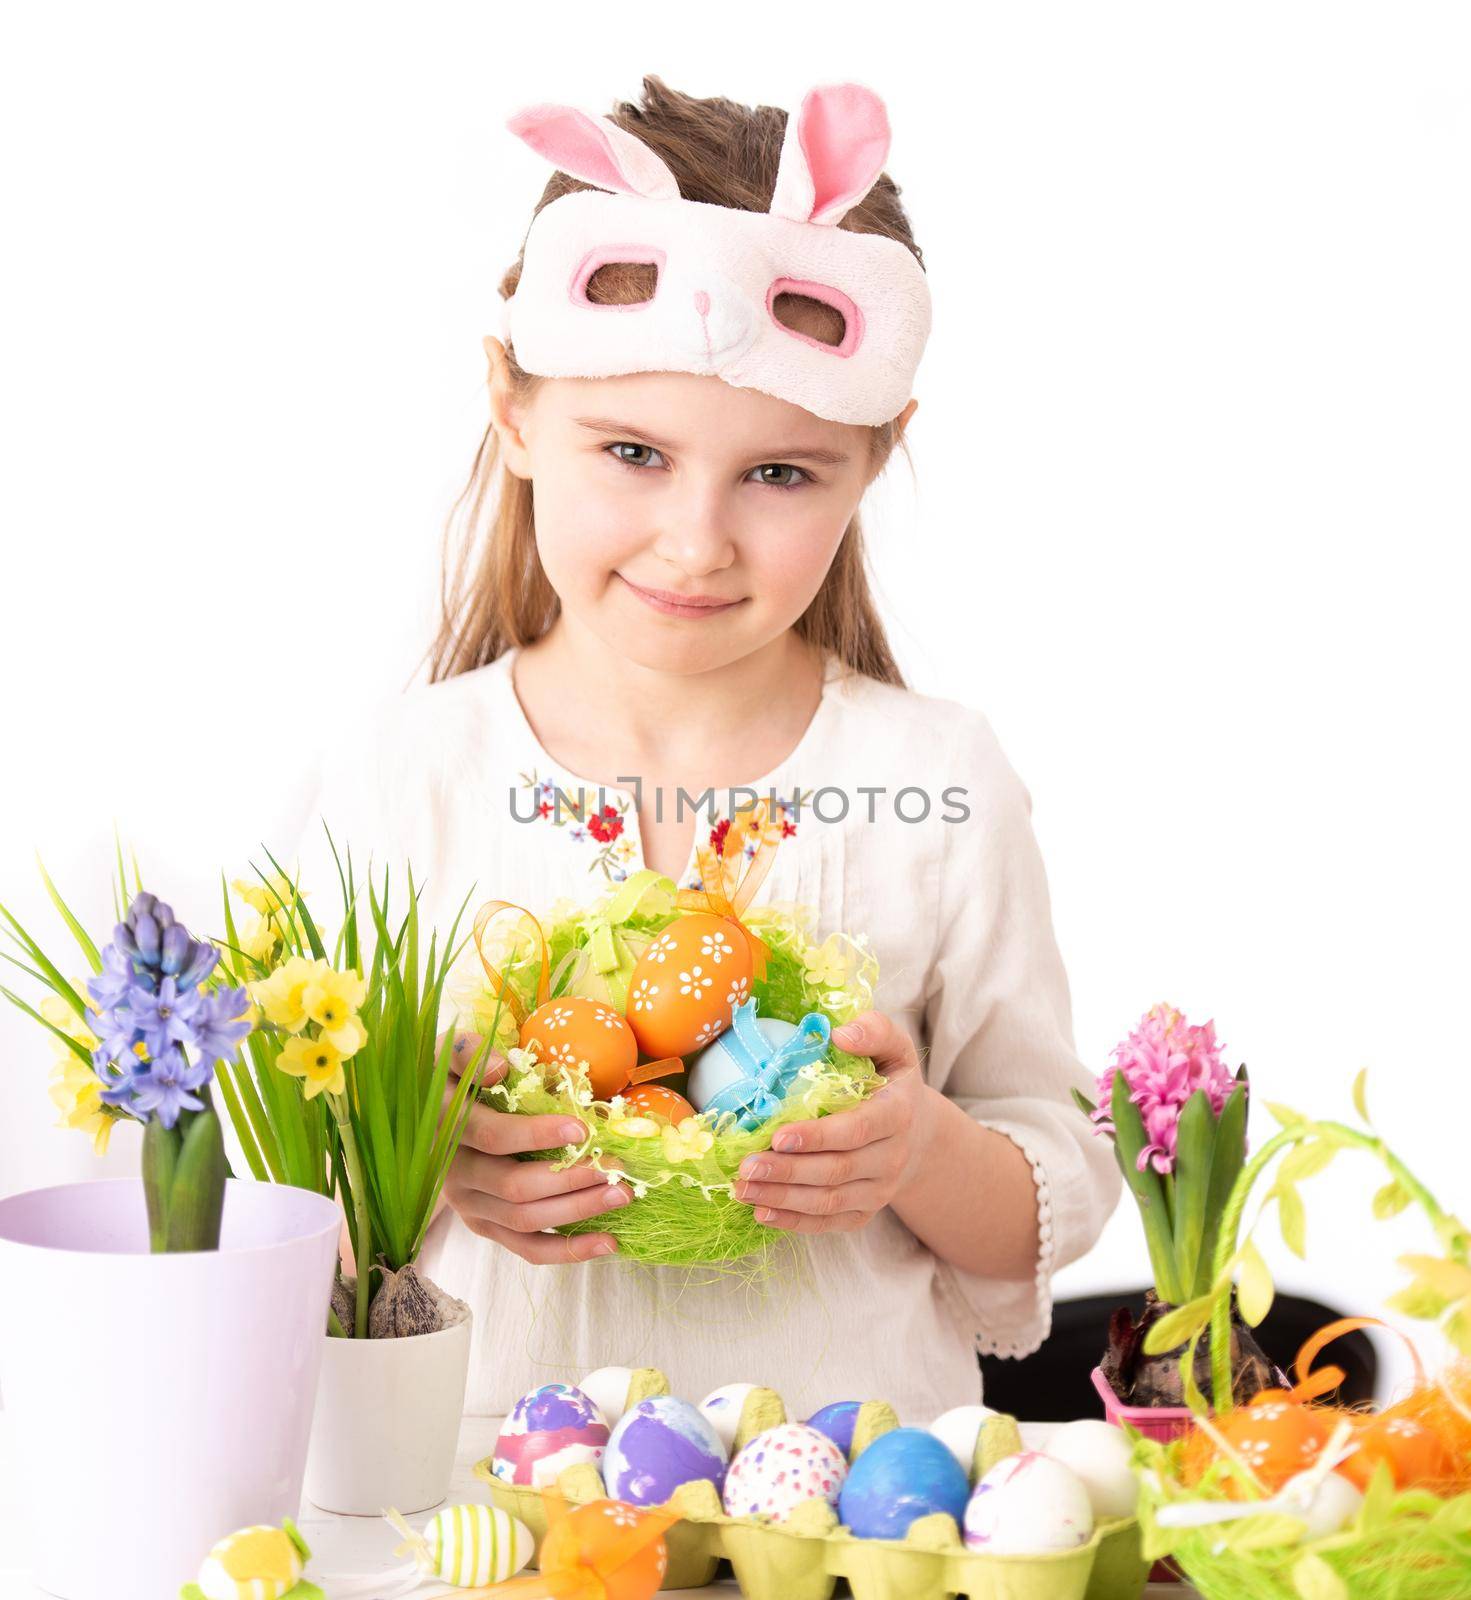 Smiling girl with vine basket of celebrative items, prepared for Easter, on white background